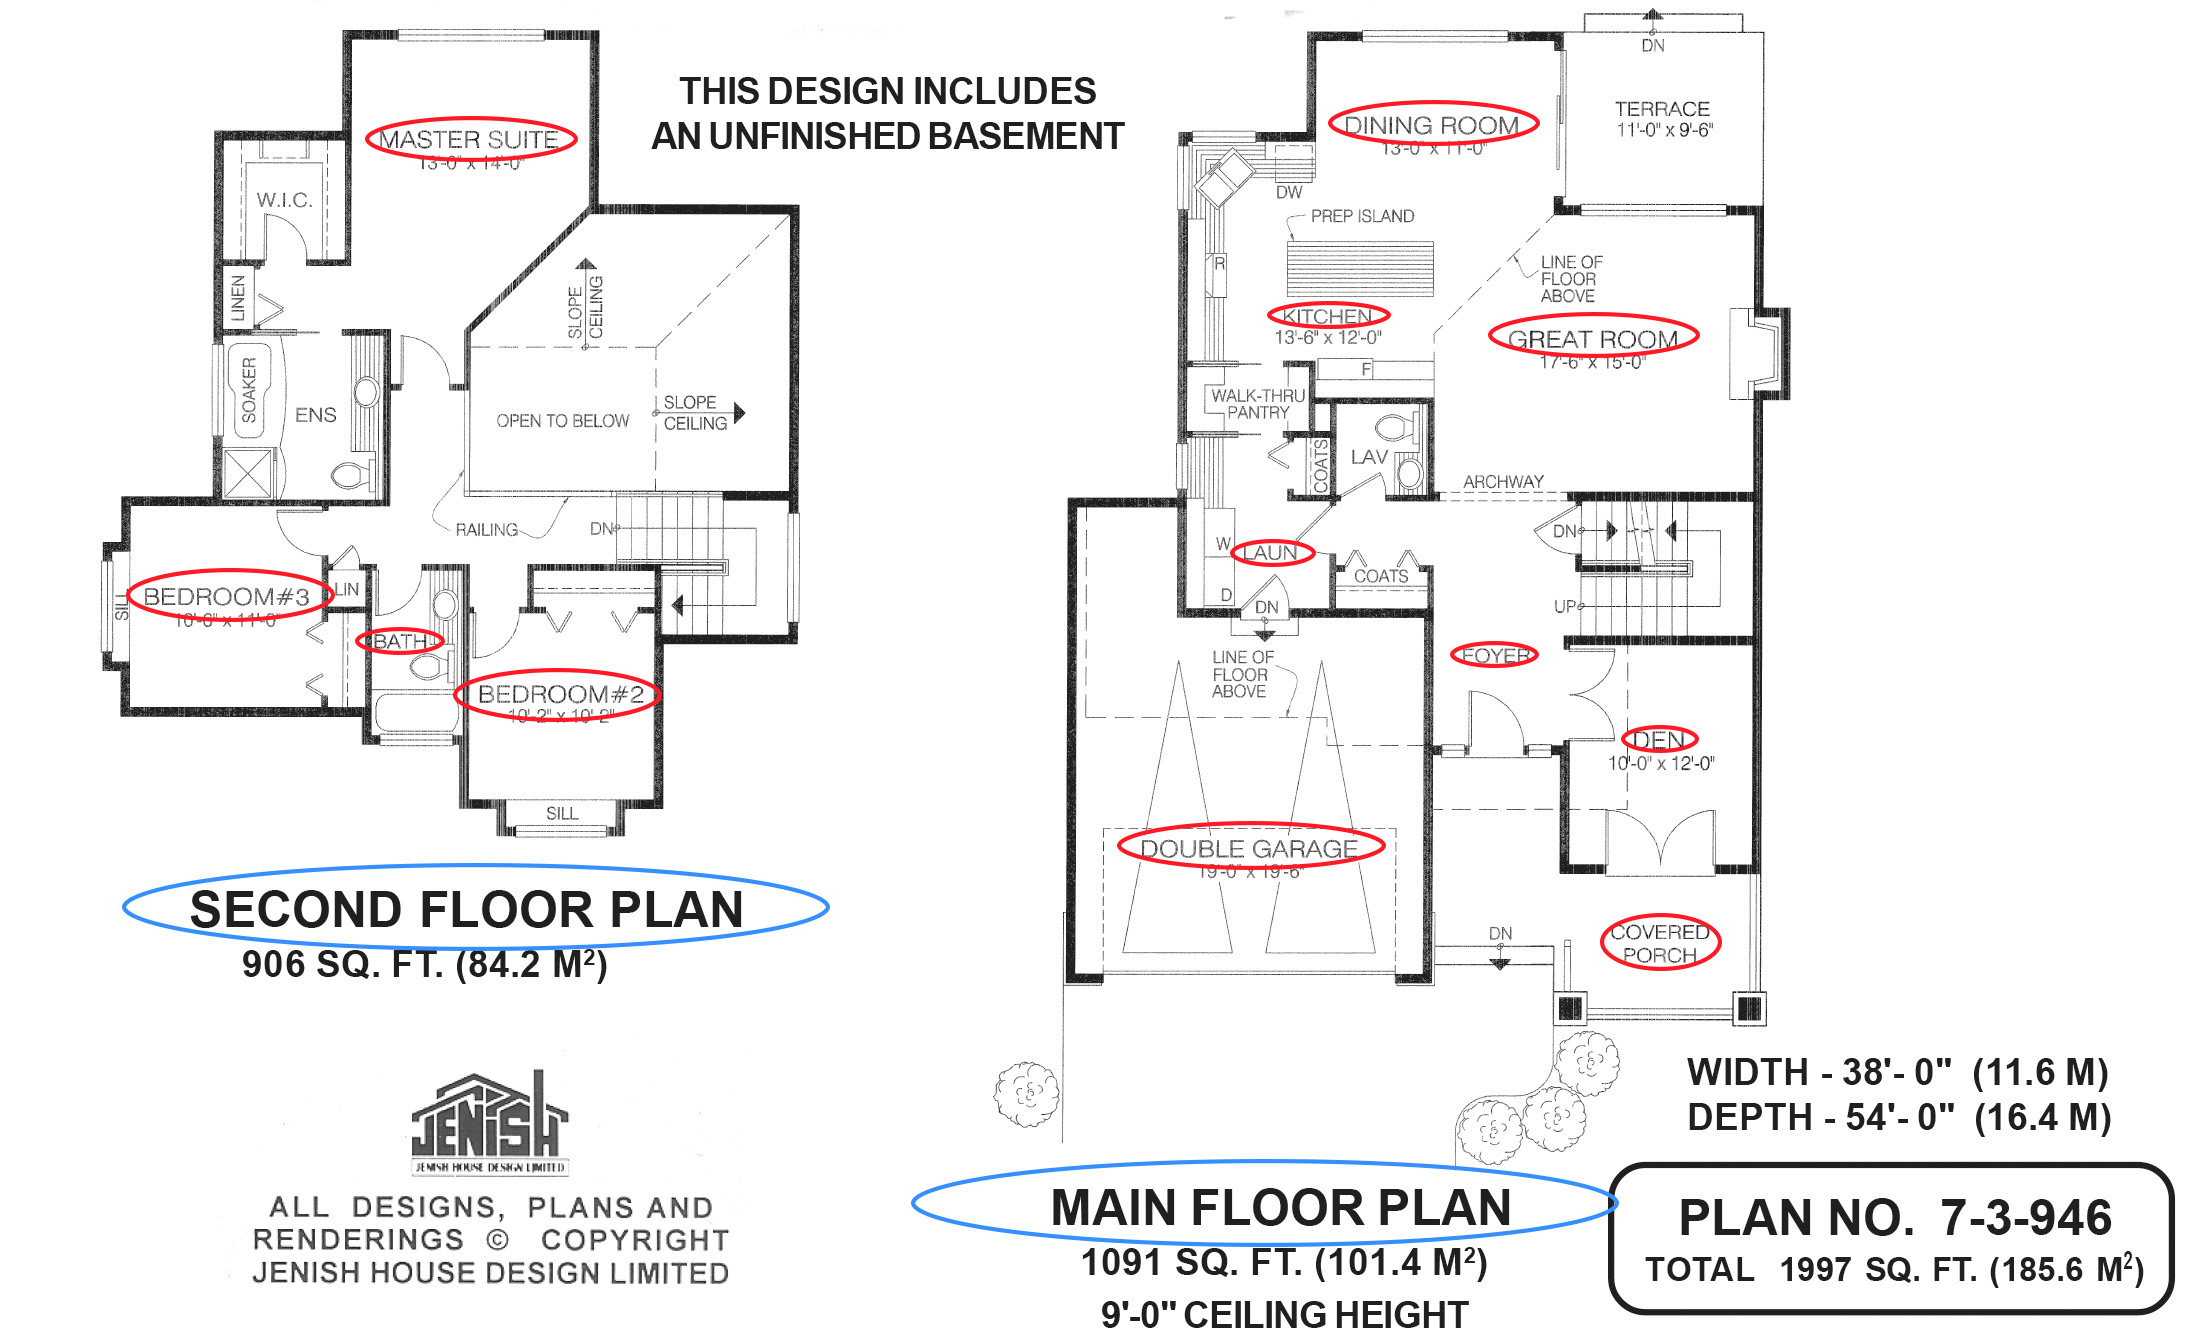 How to Read Floor Plans and Why They Can Be Superior to Photos